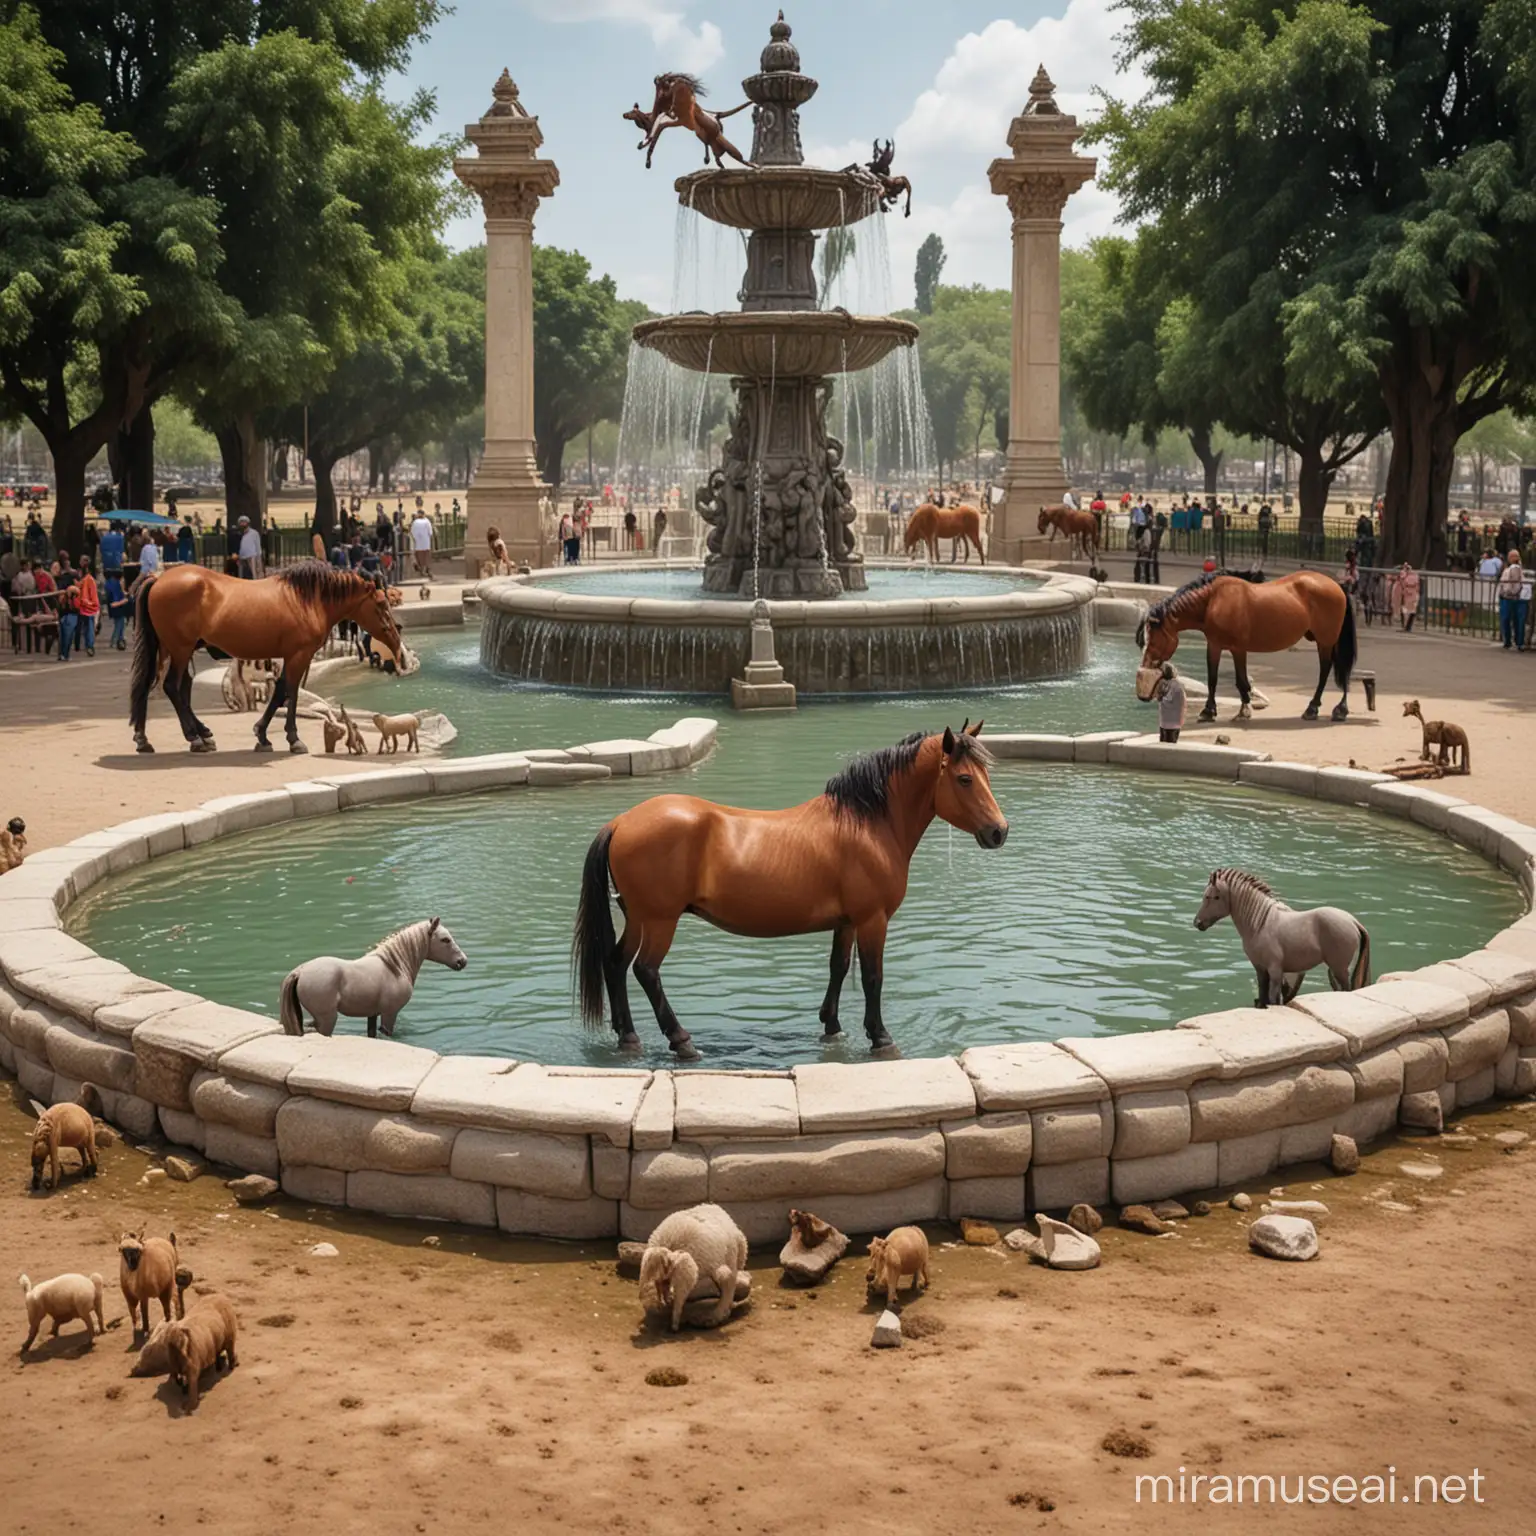 Giant Ant and Miniature Horses Relaxing in Fountain with Surrounding Animals